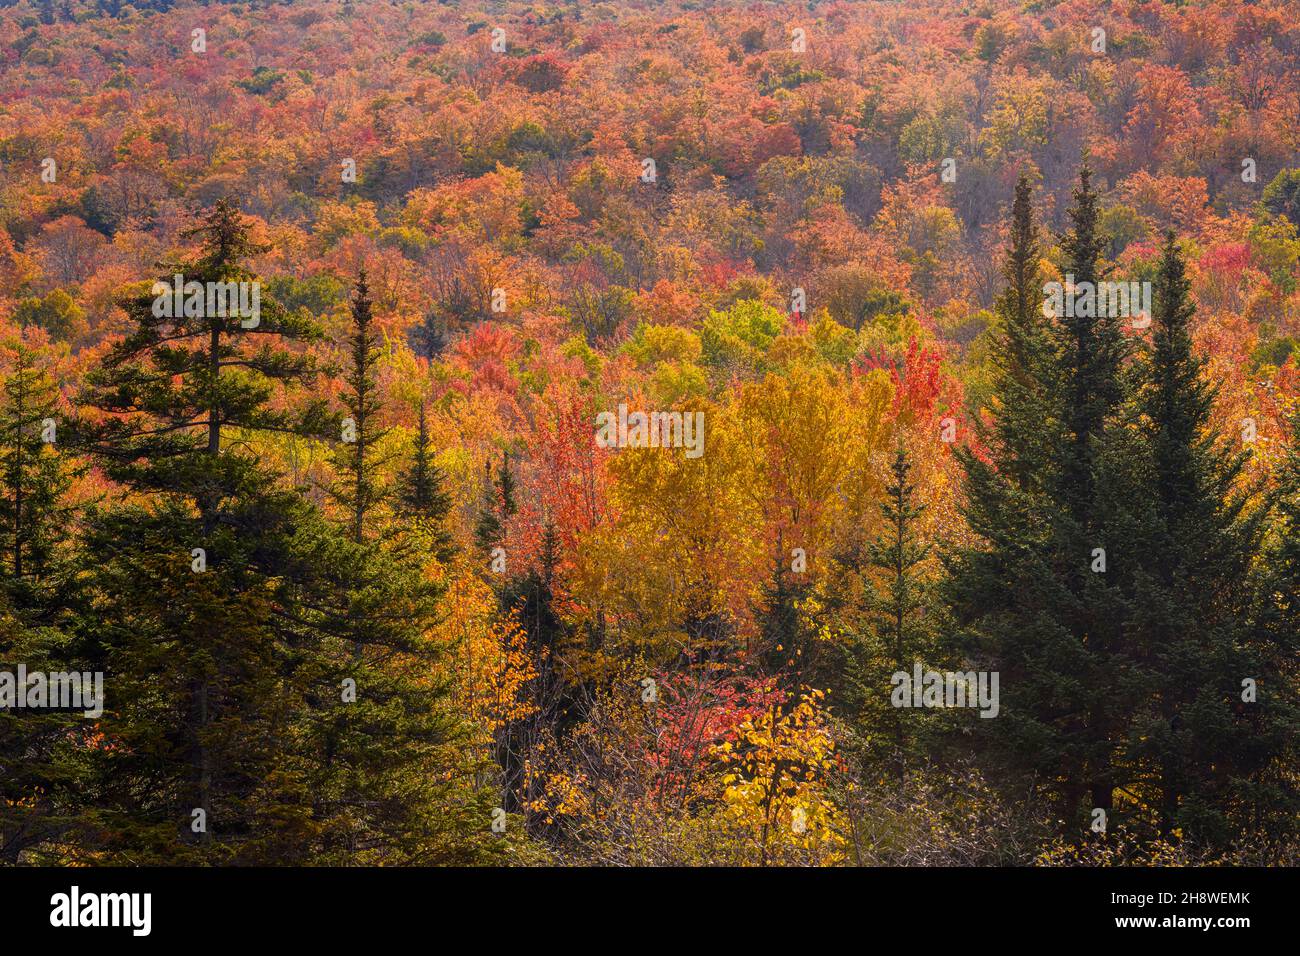 Autumn foliage in the deciduous forest on New England hillsides, White Mountain National Forest, New Hampshire, USA Stock Photo